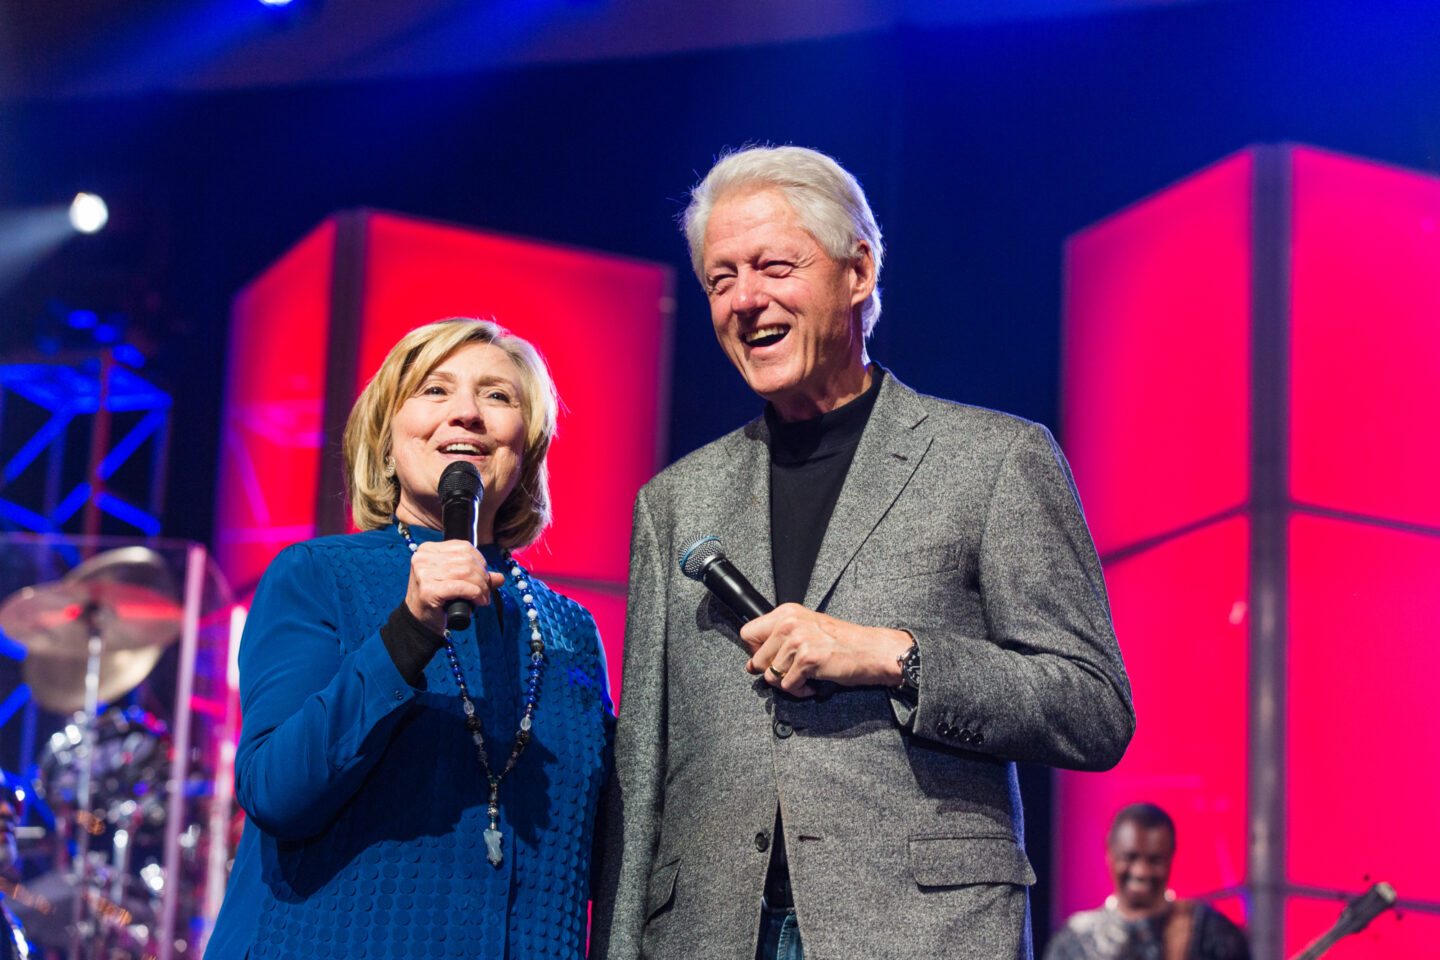 Secretary Clinton and President Clinton speak on stage during a concert.